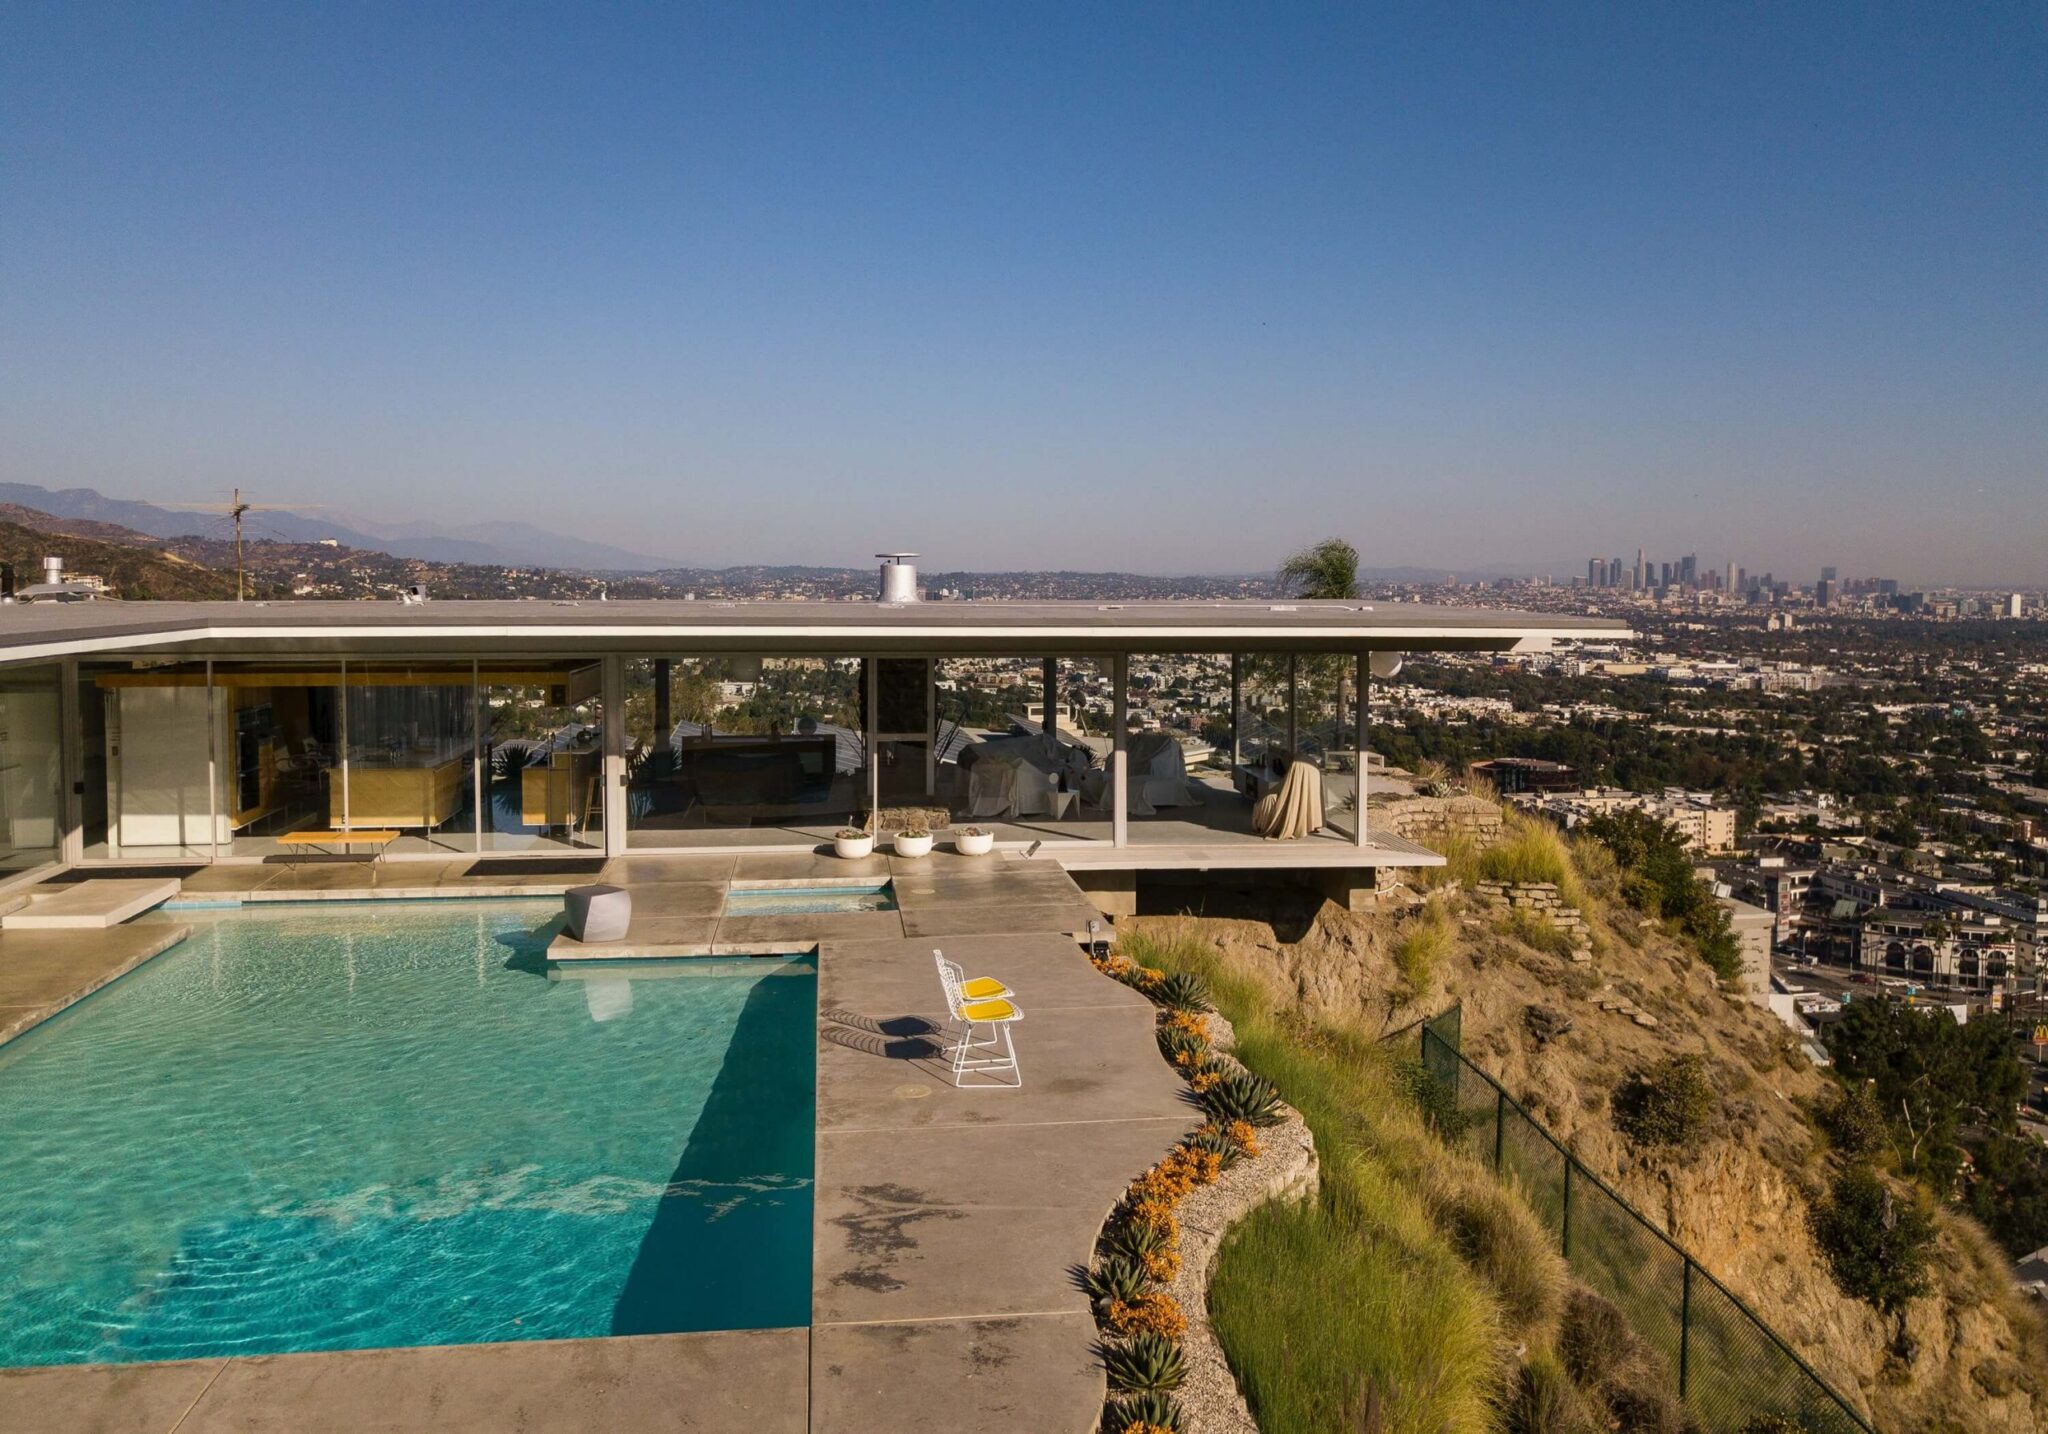 , Common Mistakes to Avoid When You Are Buying a Luxury Hollywood Hills House